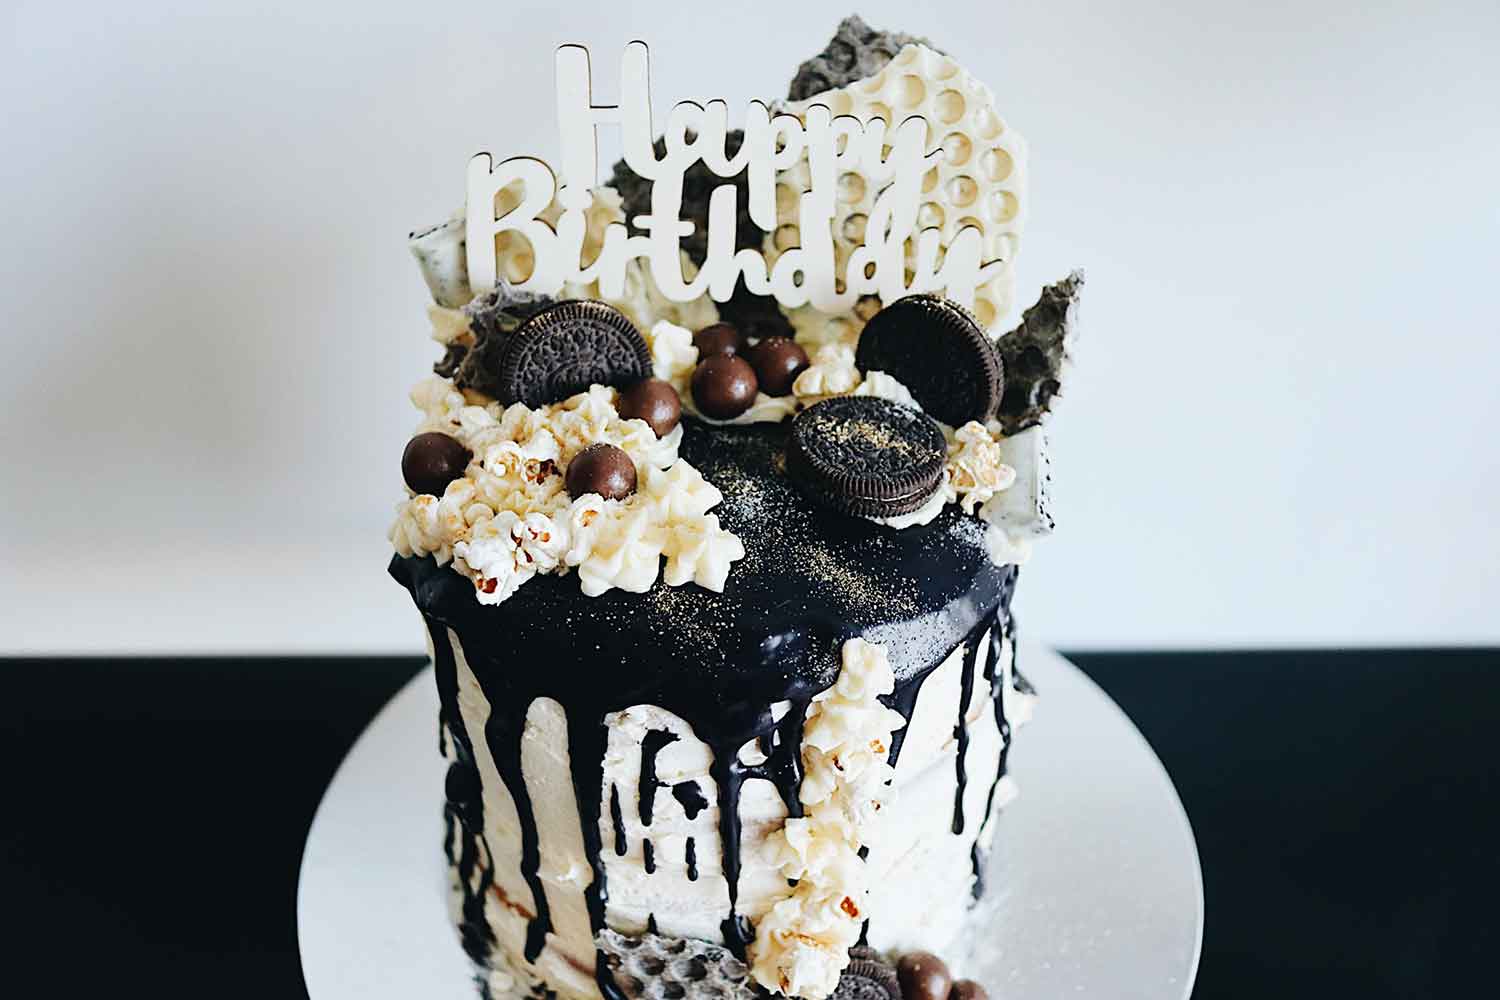 Drip Cake Recipe that’s Easy and requires no baking!